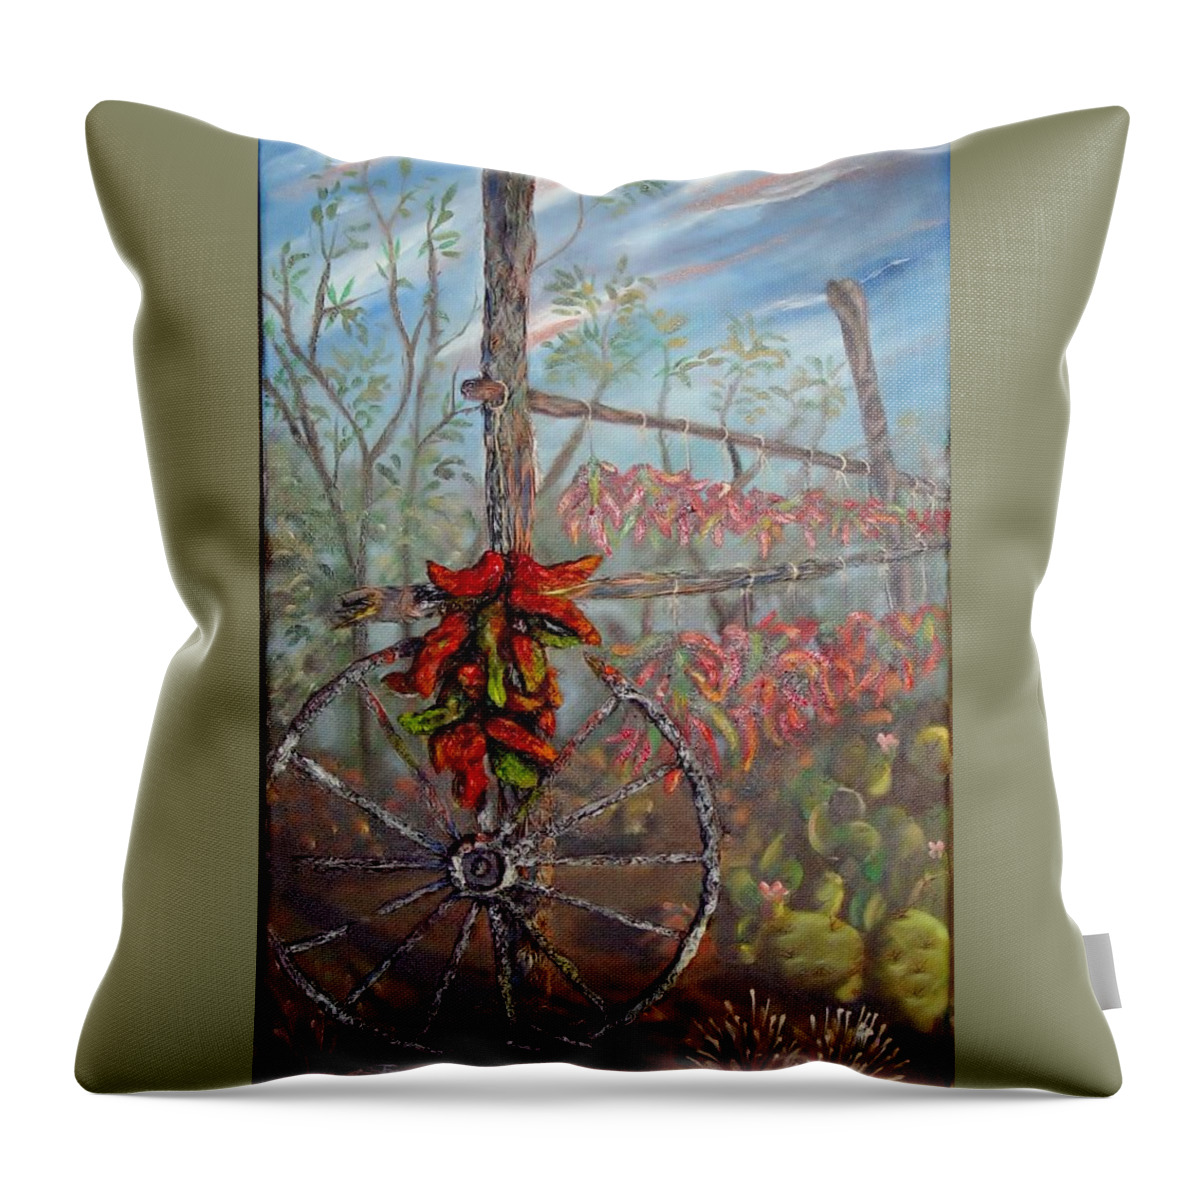 Wheel Throw Pillow featuring the painting Broken Wheel and Chili by Sherry Strong